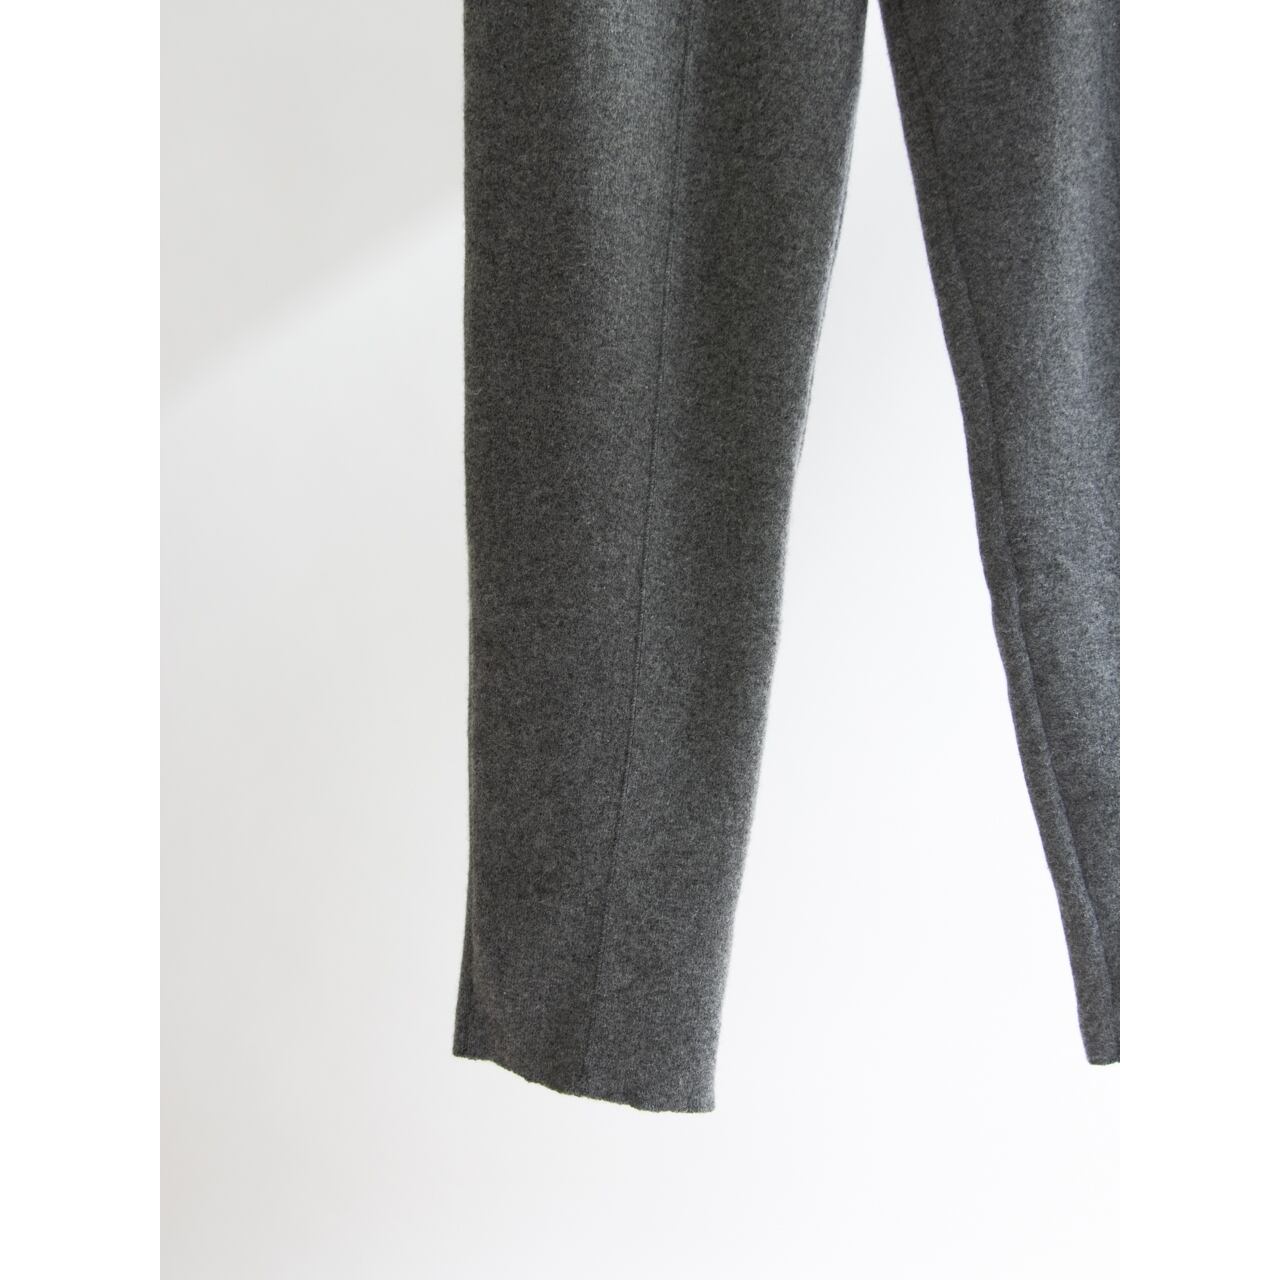 【ANDREA FENZI】Made in Italy 100% Cashmere Knit Pants（アンドレア フェンツィ イタリア製カシミヤニットパンツ）